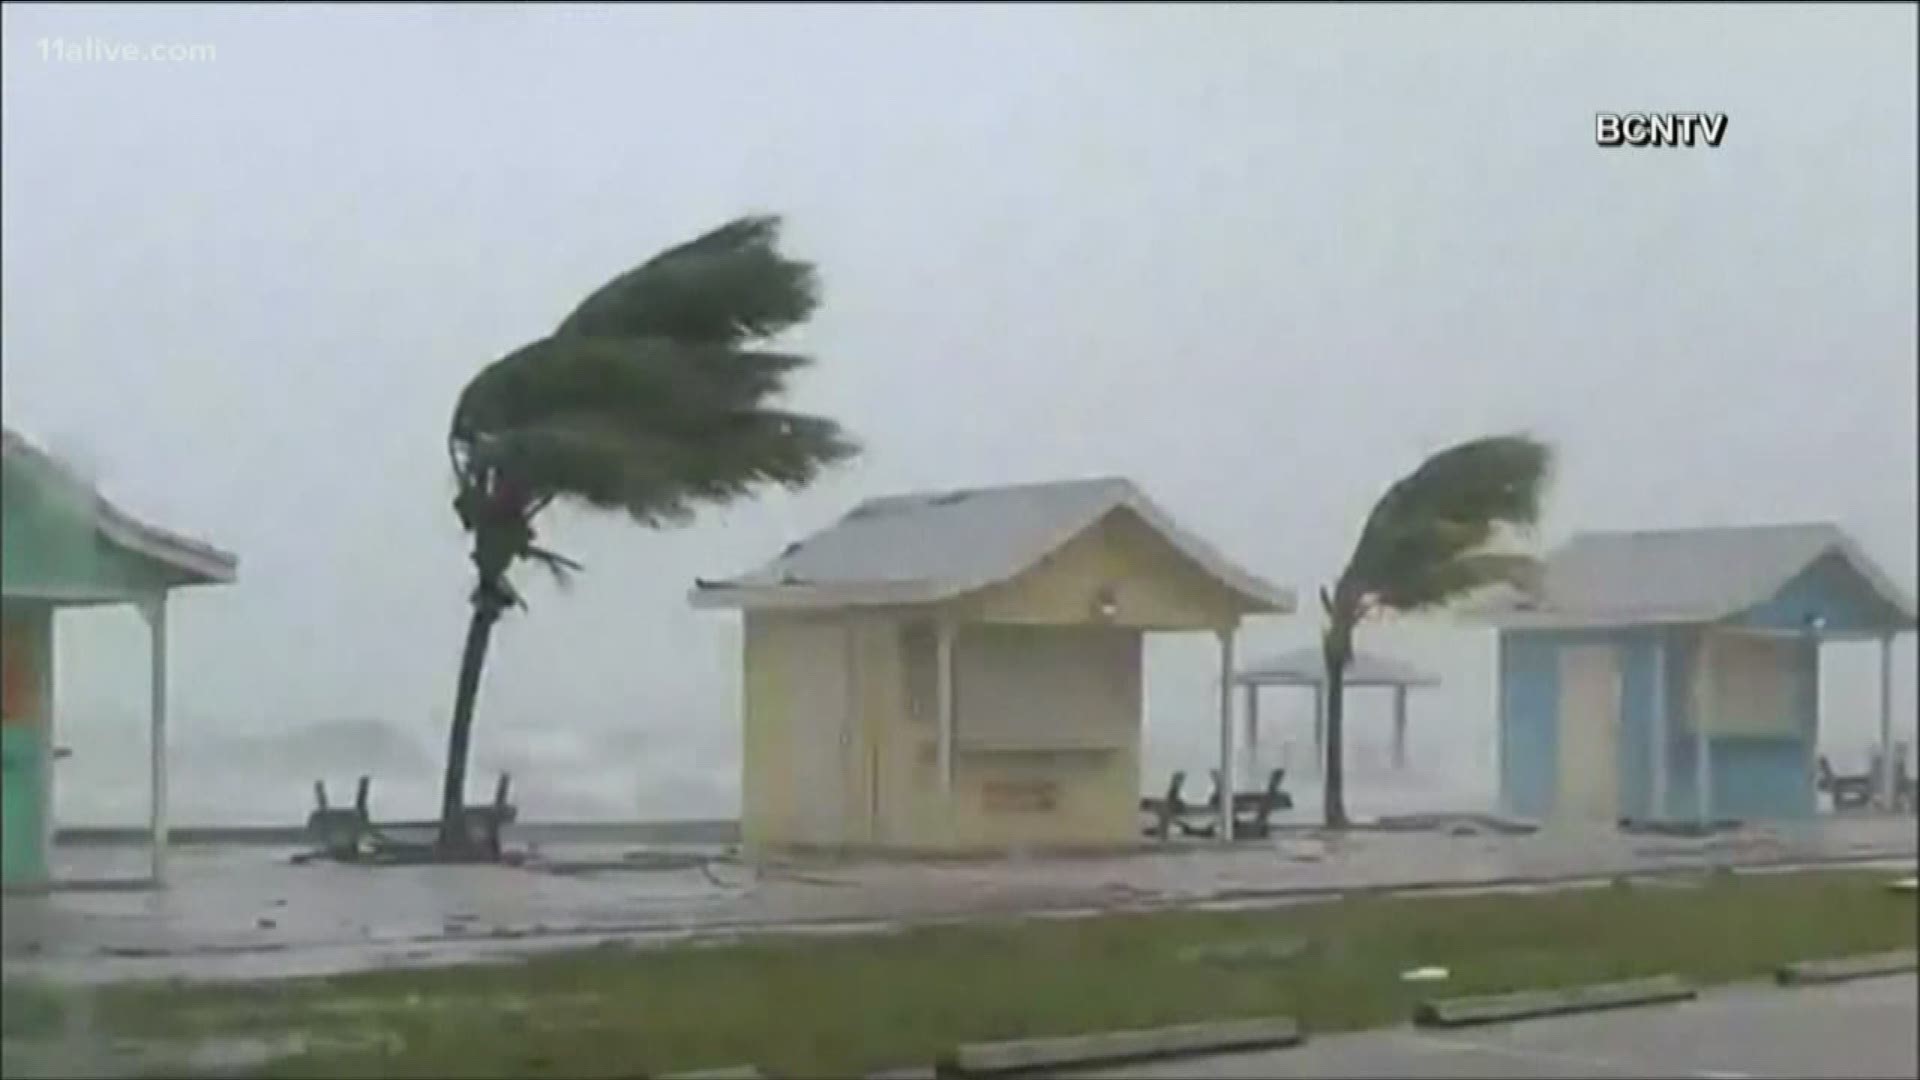 The monster category 5 storm tore through the Bahamas Sunday, as it begins to move to the US east coast.